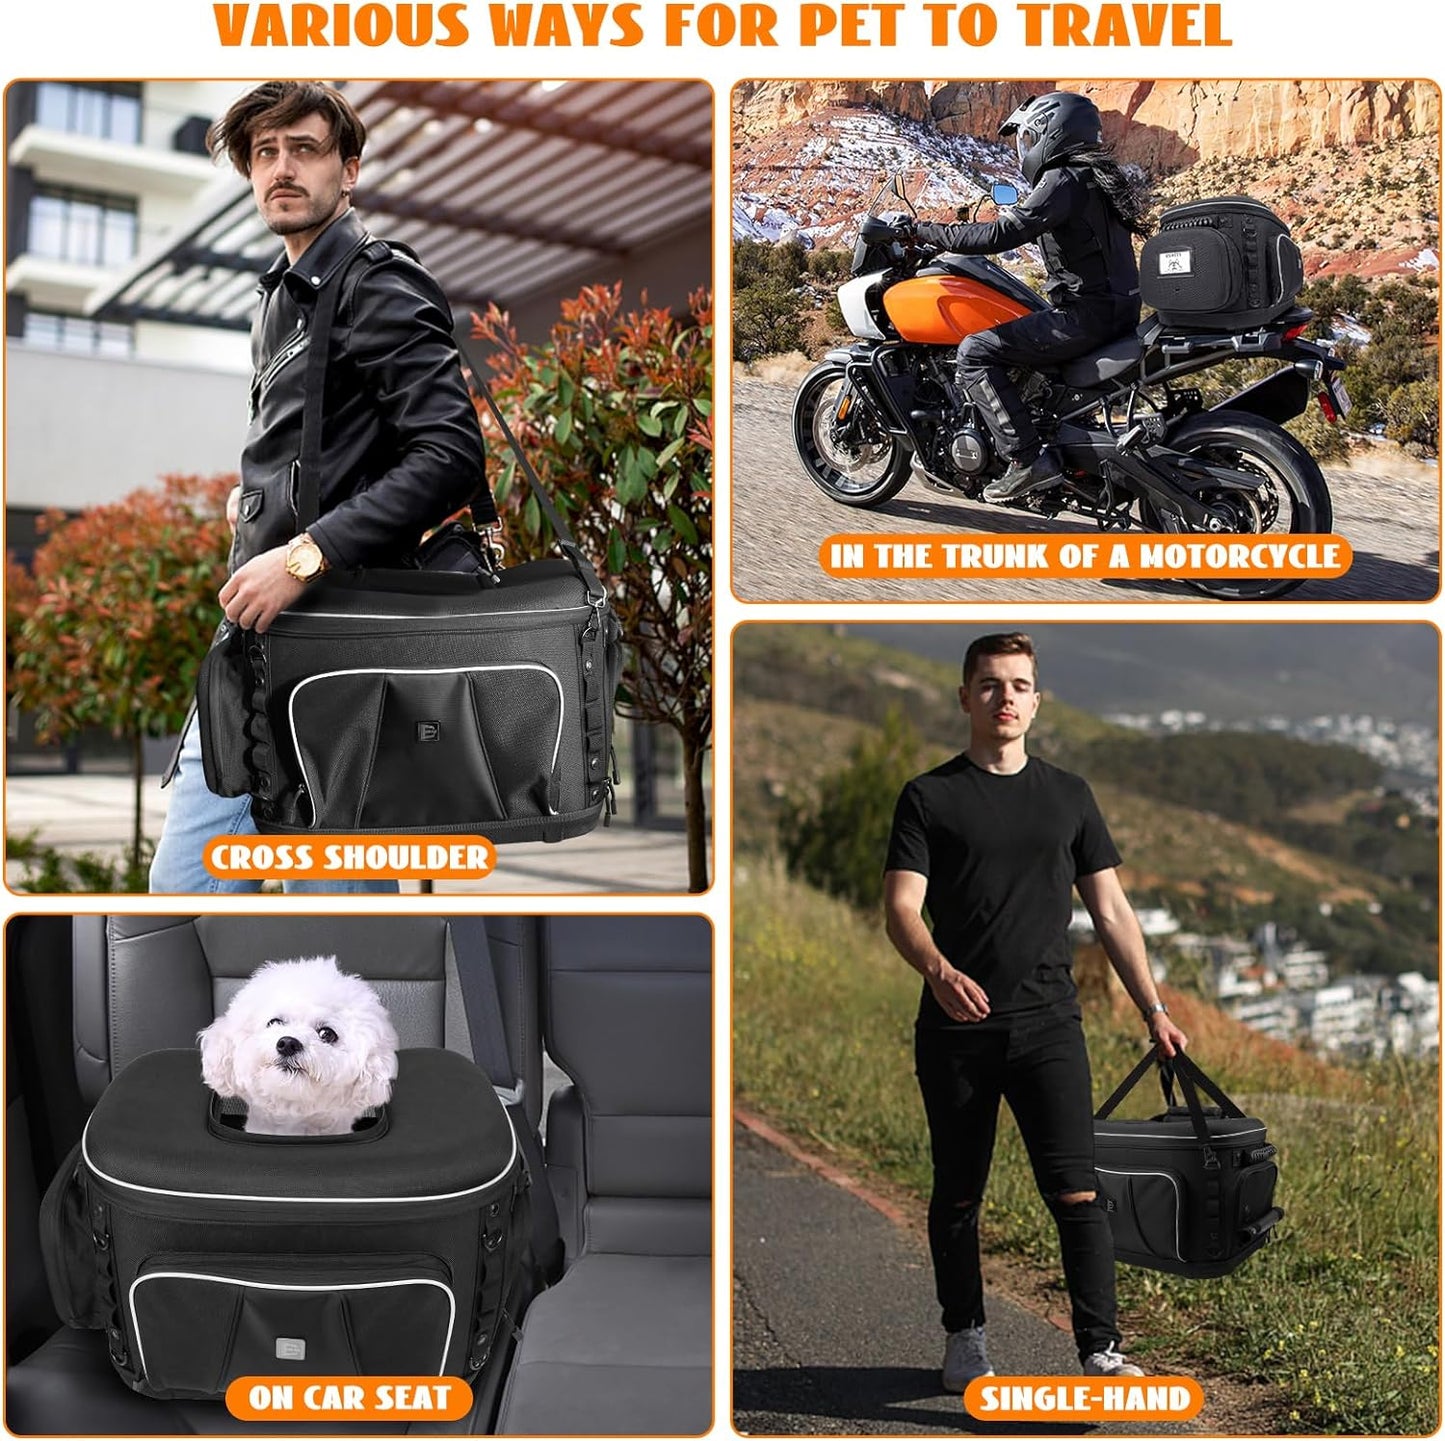 Eumti Motorcycle Dog/Cat Carrier Portable Pet Voyager Carrier Crate Travel Luggage Bags Load Capacity 20lbs for UTV/ATV Luggage Rack or Harley Touring Trike Model